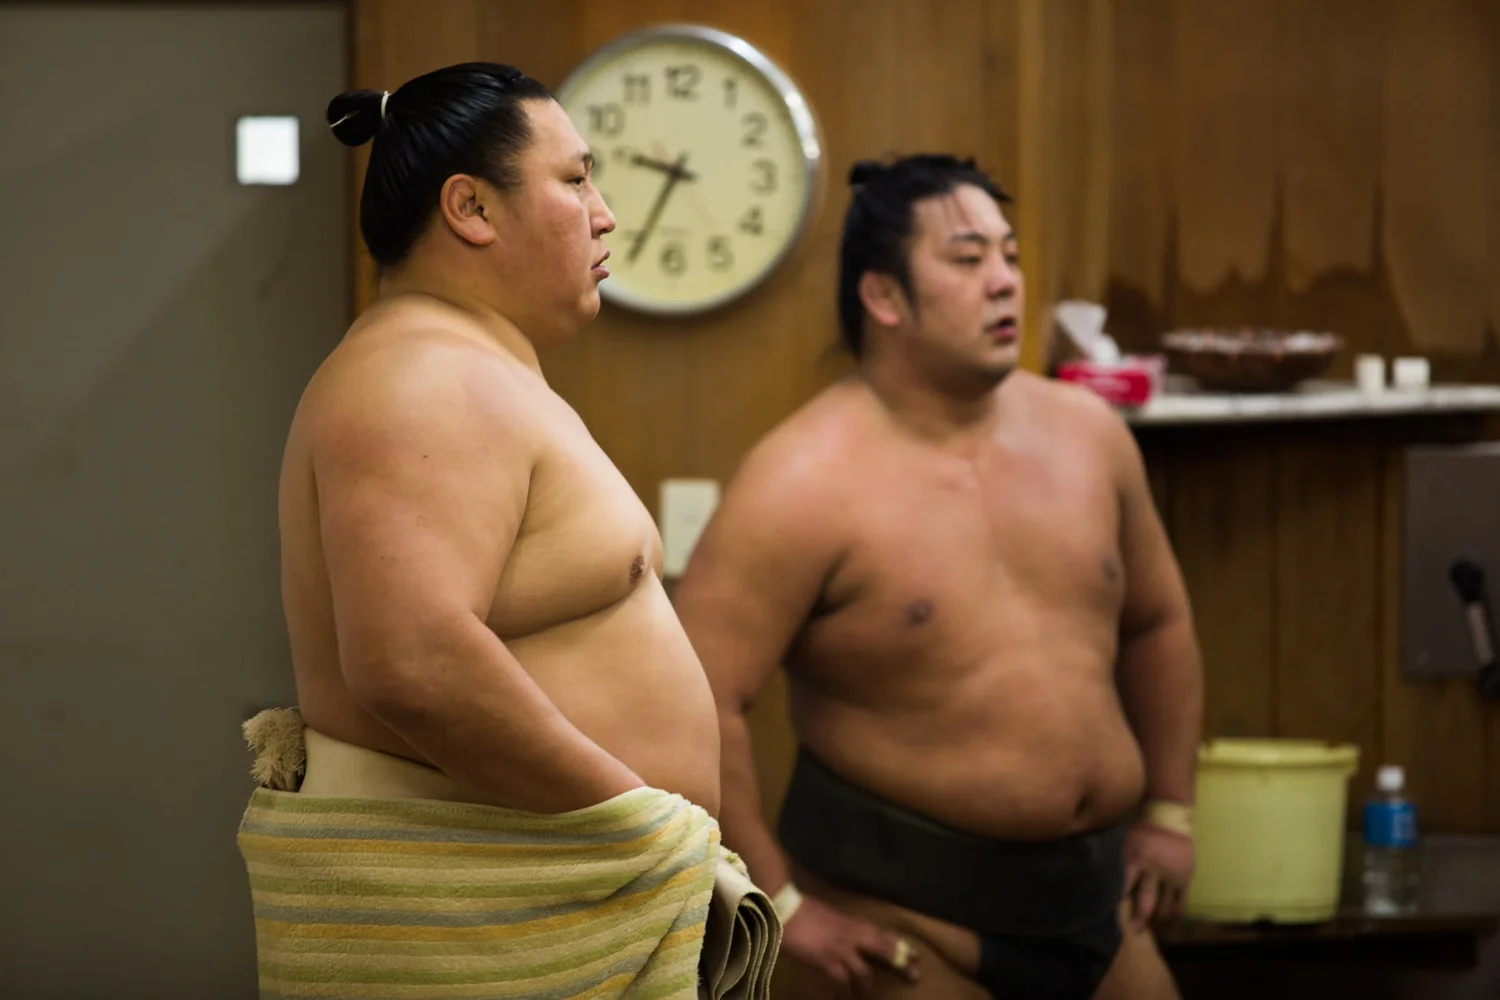 Watch Morning Sumo Training & Intermingle with Wrestlers!